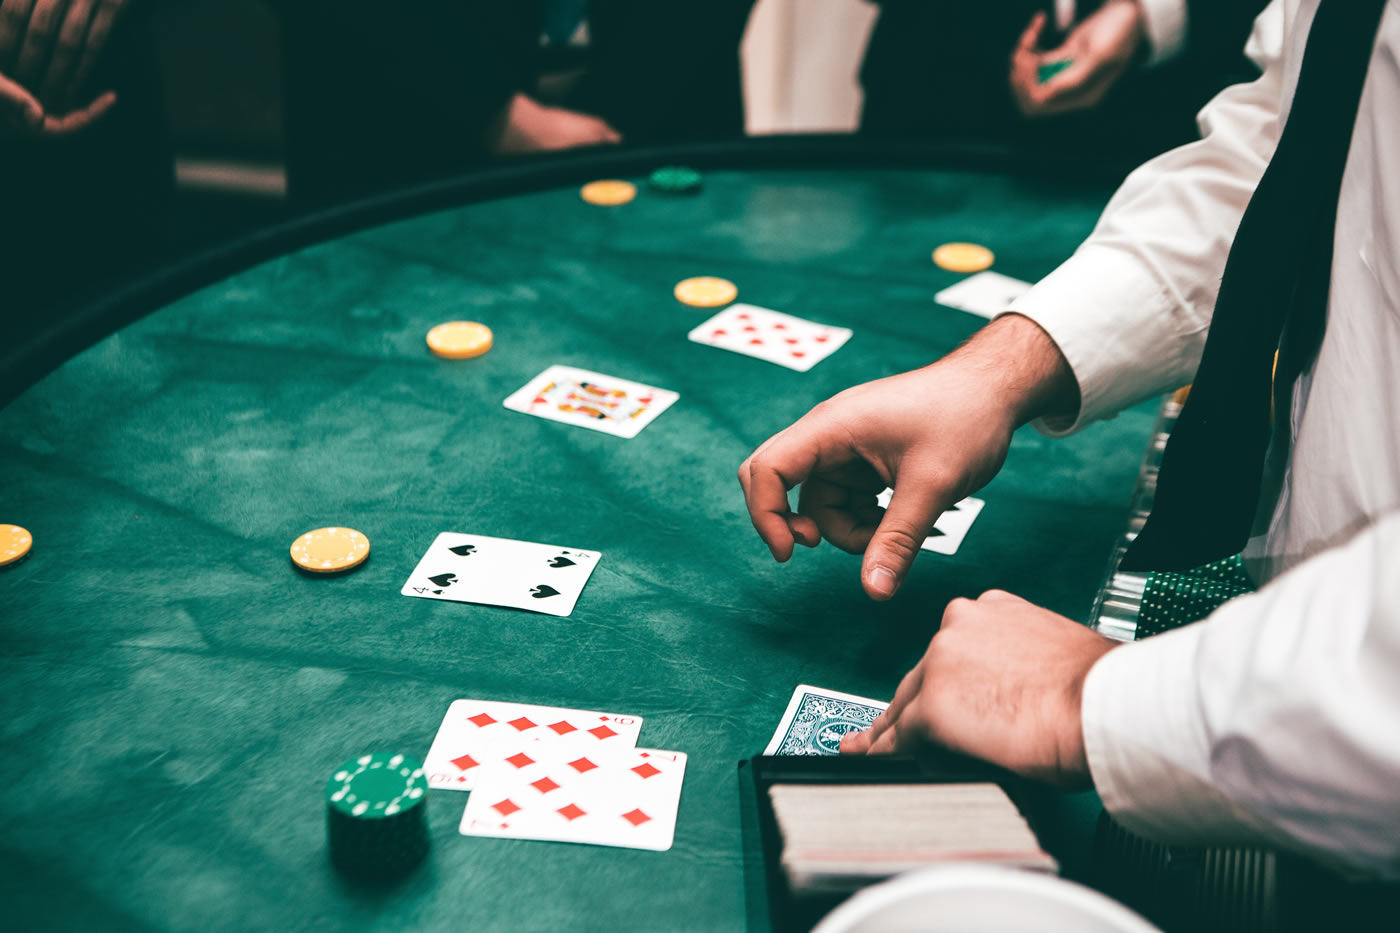 Betting in Casinos - What Proposed UK Gambling Laws Could Mean for Weybridge